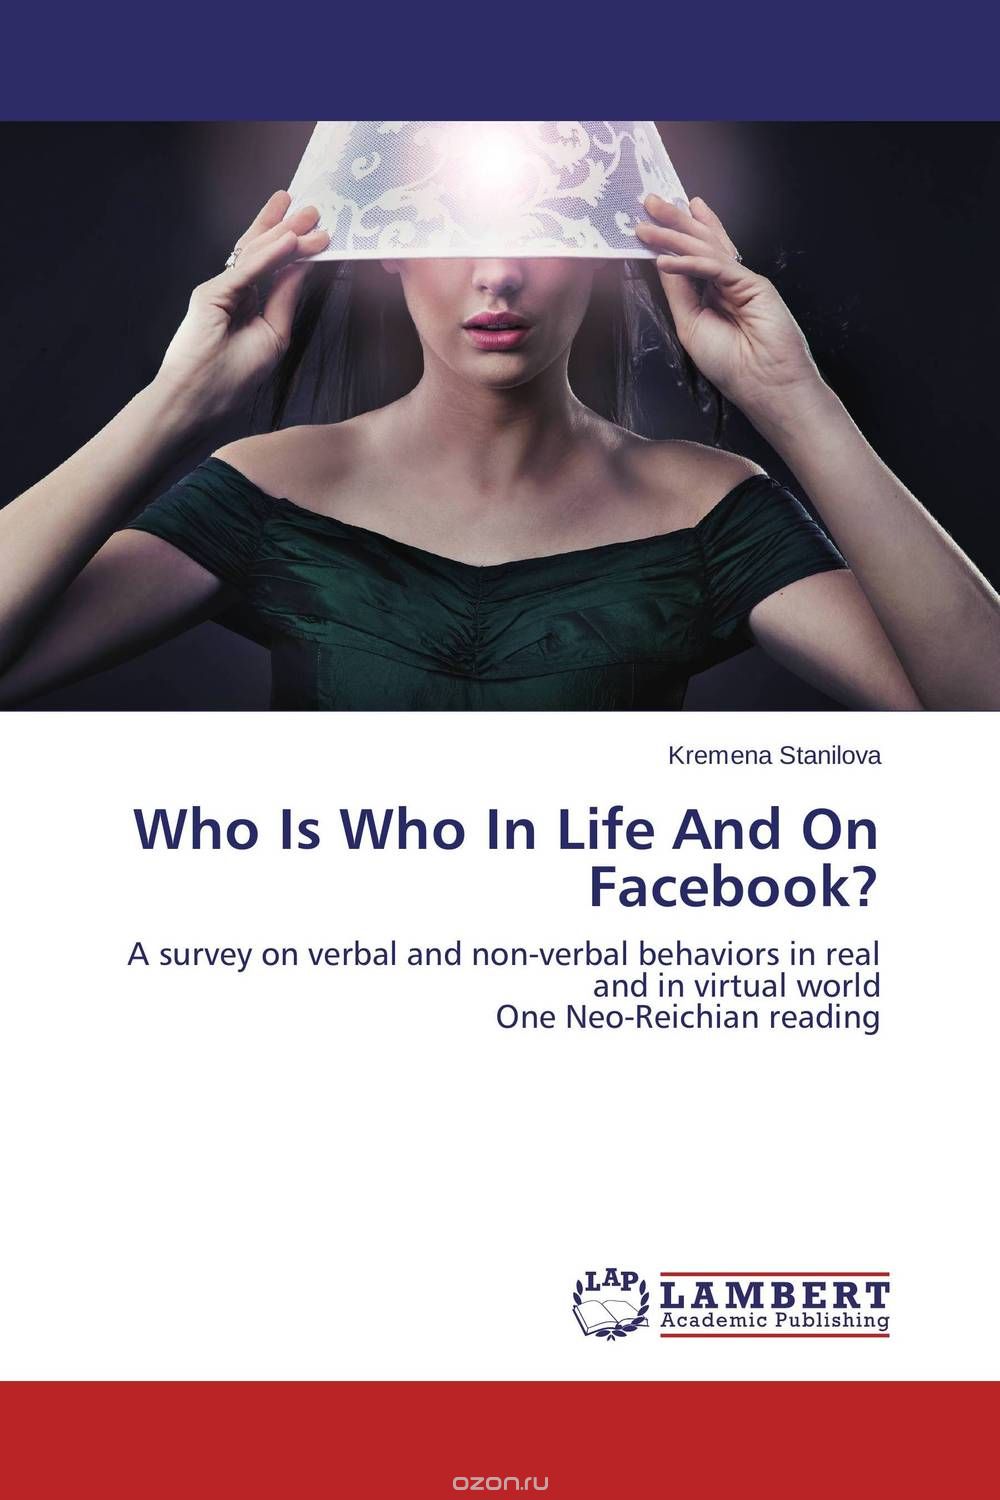 Who Is Who In Life And On Facebook?